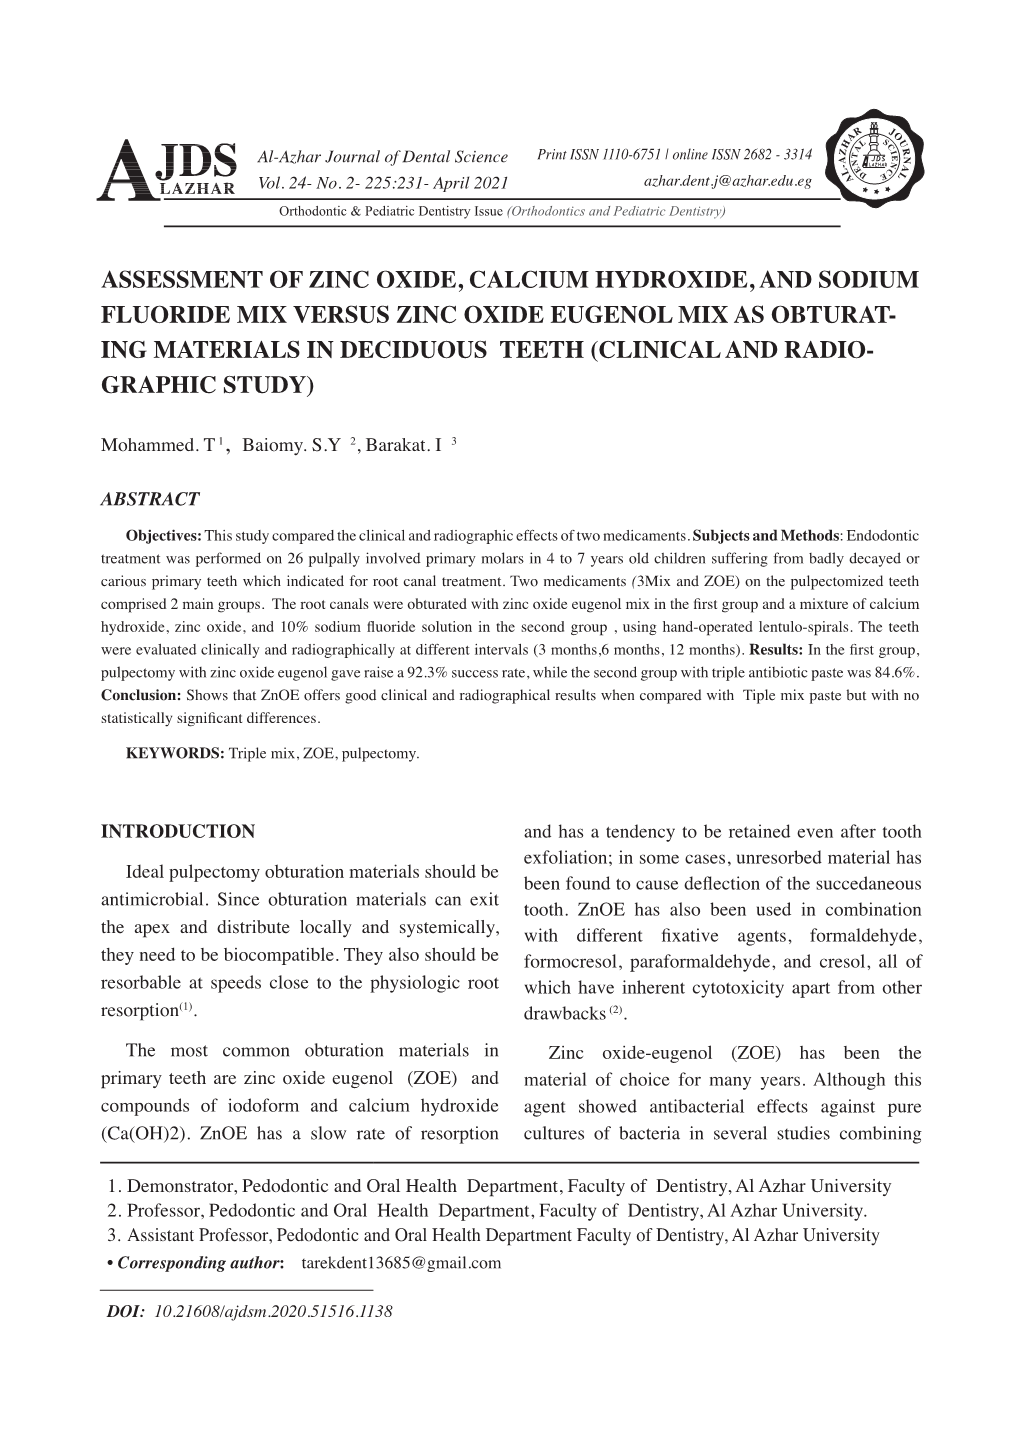 Assessment of Zinc Oxide, Calcium Hydroxide, And